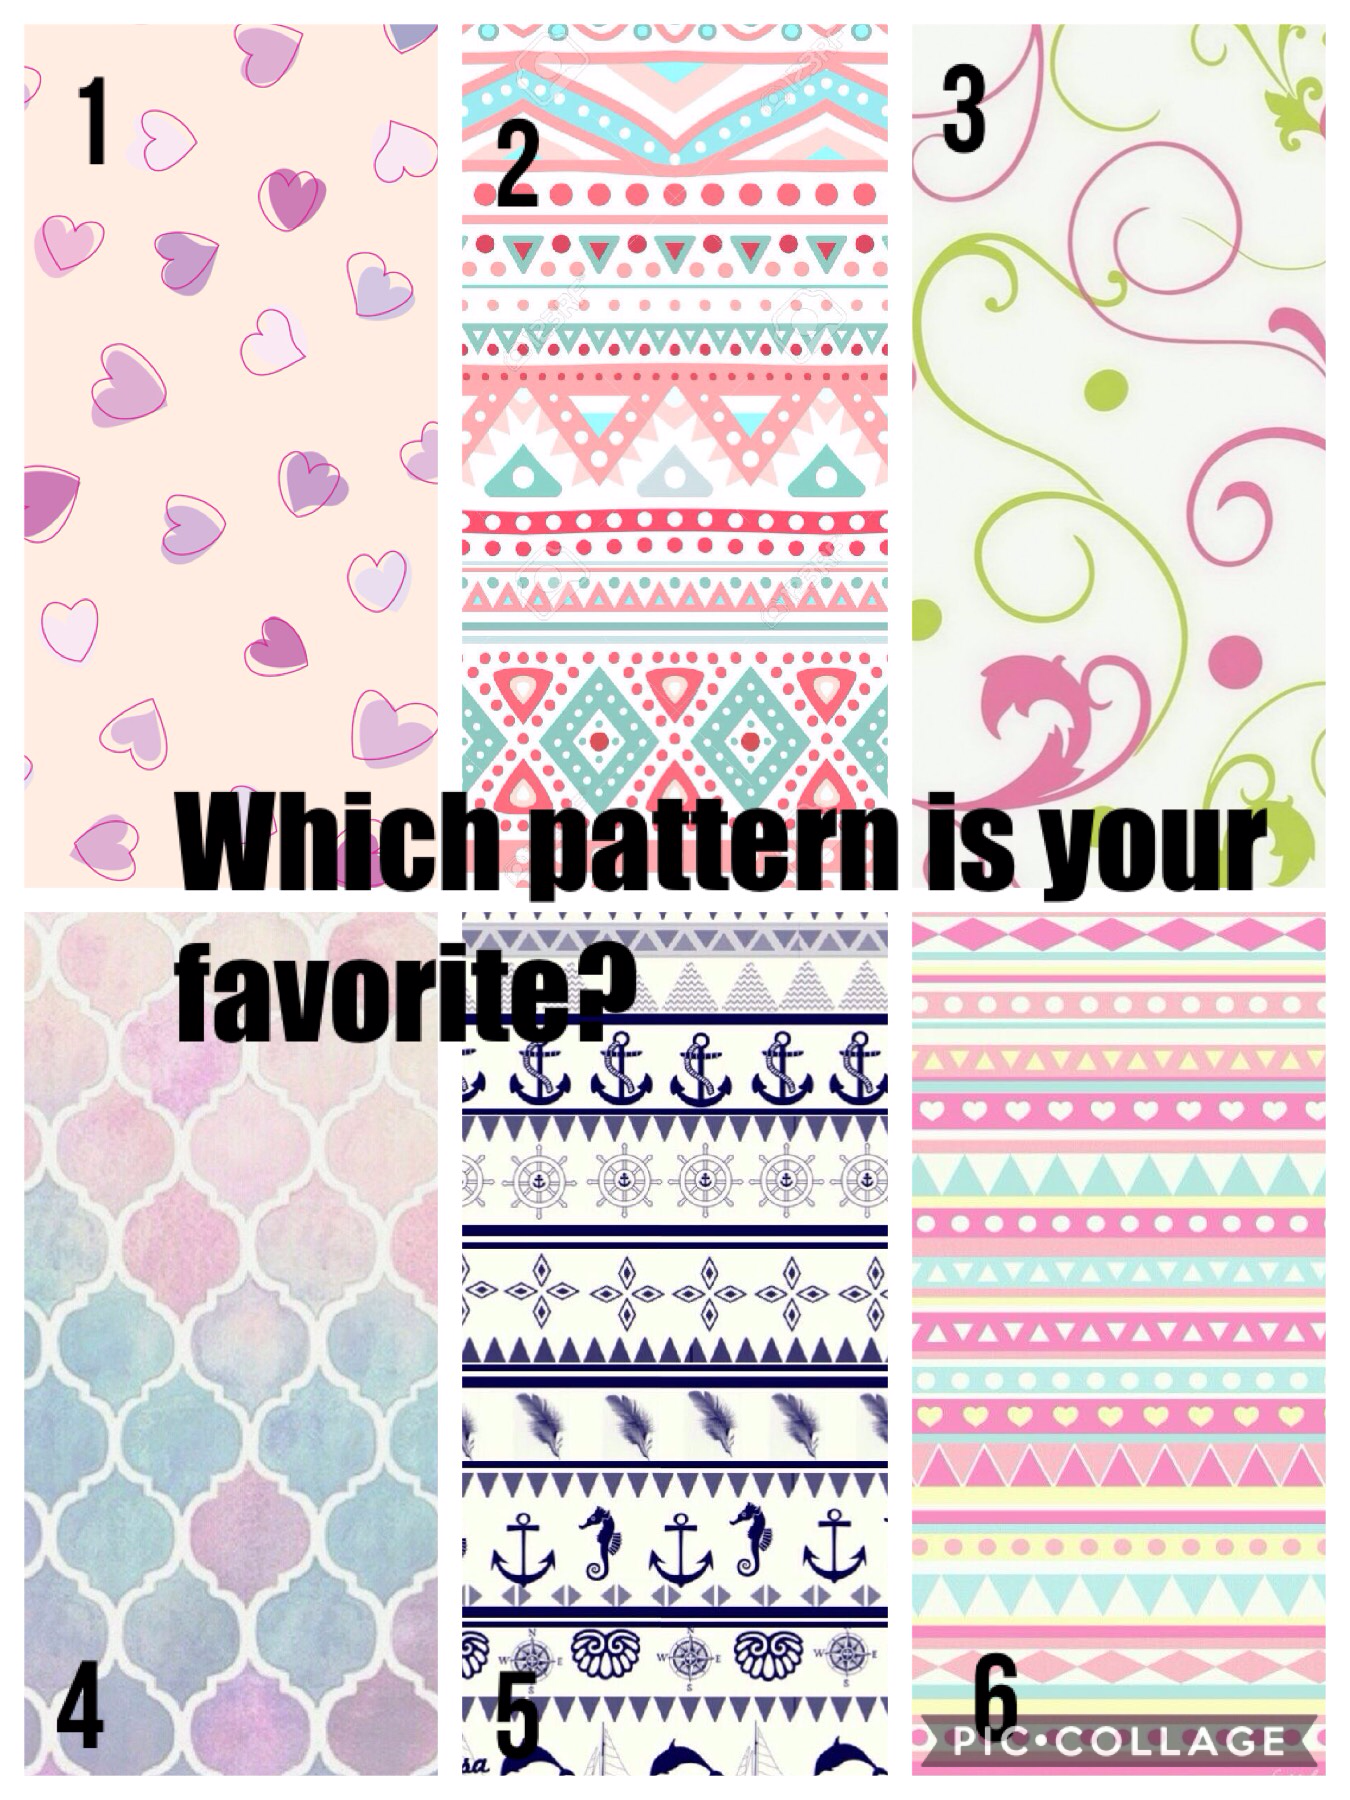 Put your favorite pattern's number in the comments.